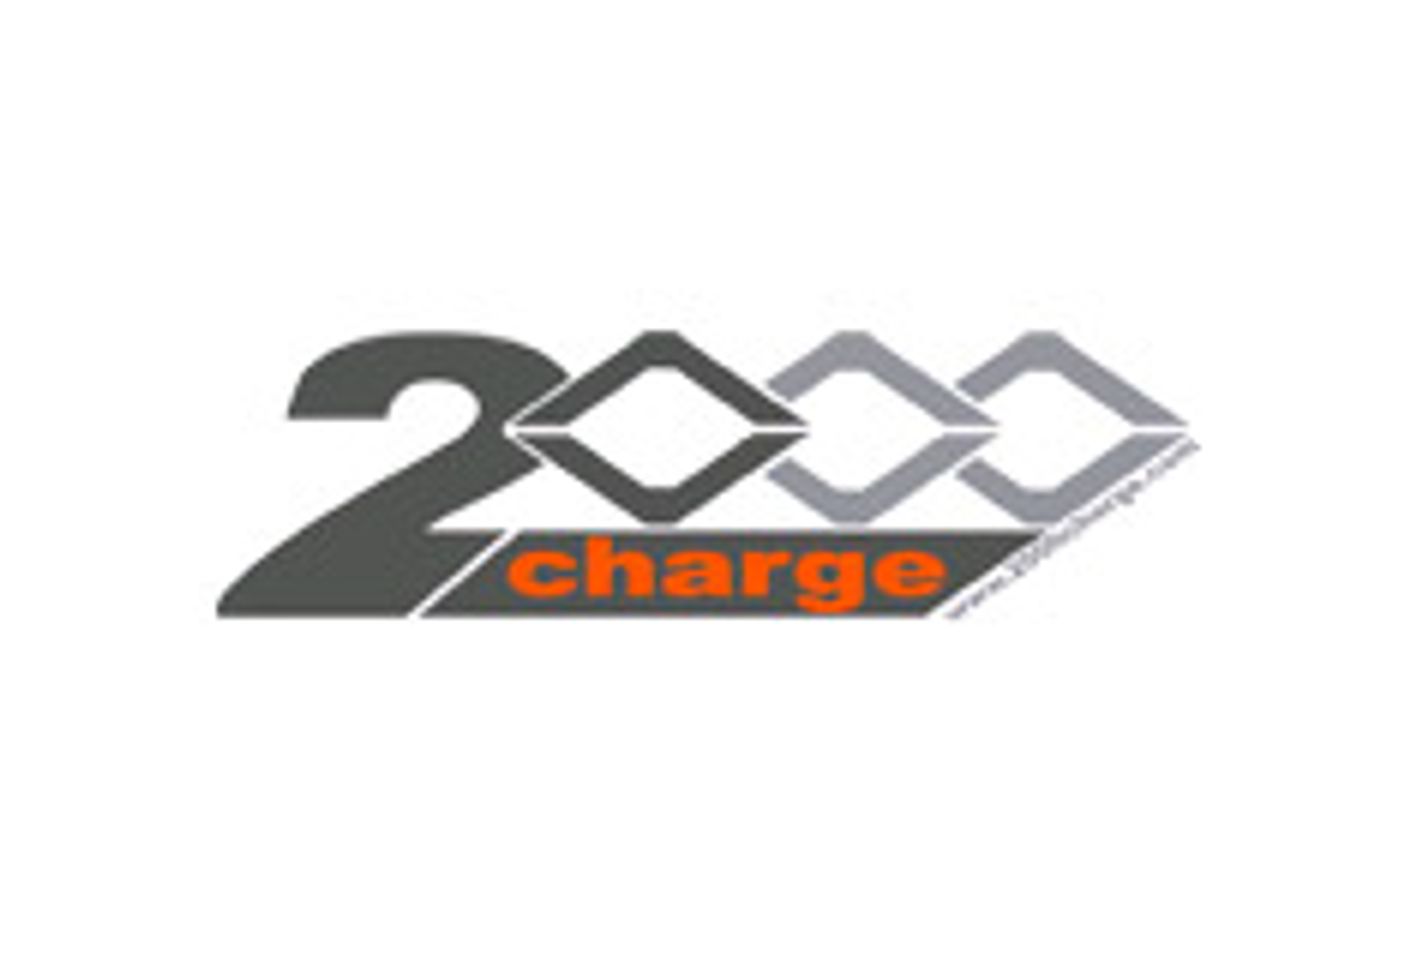 2000Charge Adds U.S. Direct Pay Payment Option